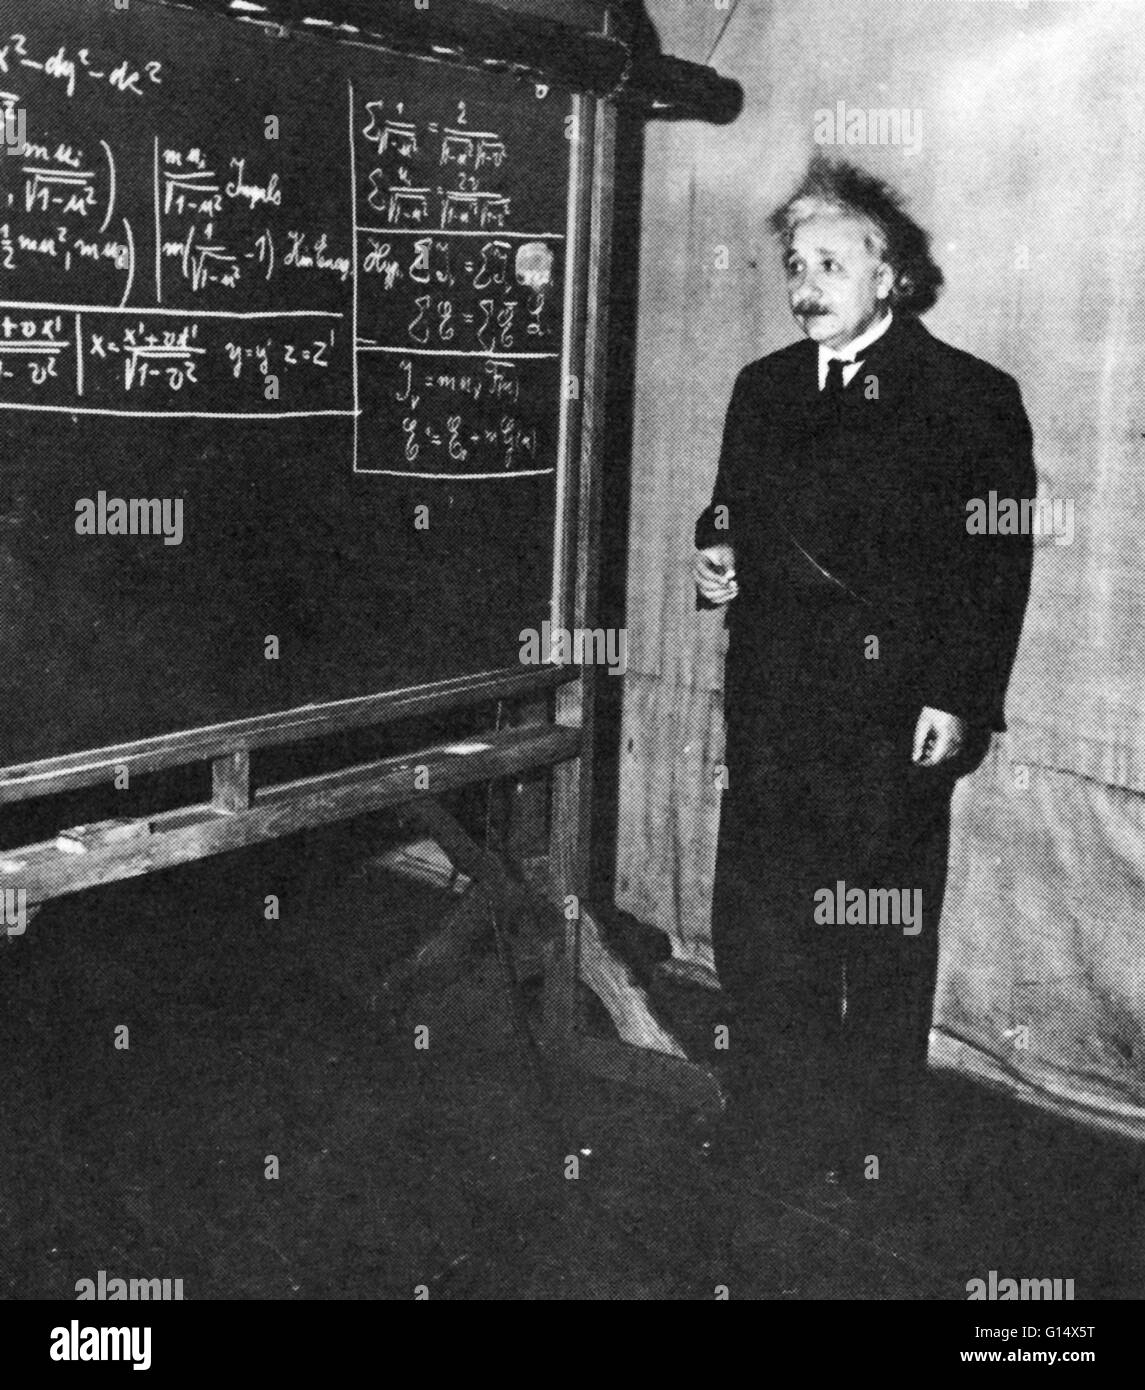 Undated photo of Einstein at Princeton University. Albert Einstein (March 14, 1879 - April 18, 1955) was a German-born theoretical physicist who developed the general theory of relativity, effecting a revolution in physics. Einstein is often regarded as t Stock Photo